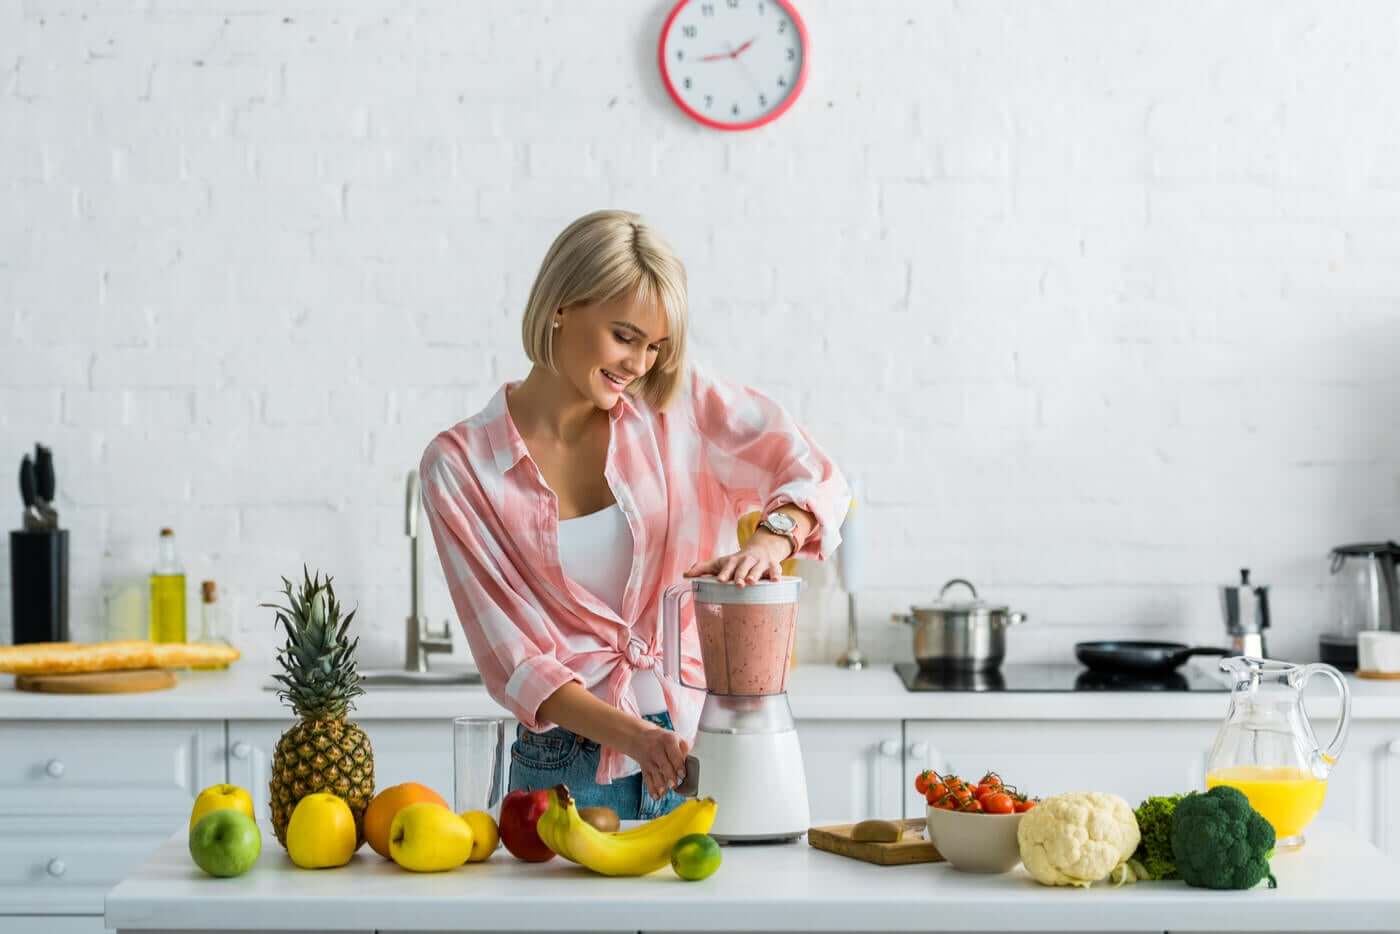 A woman preparing fruit smoothies in her kitchen.